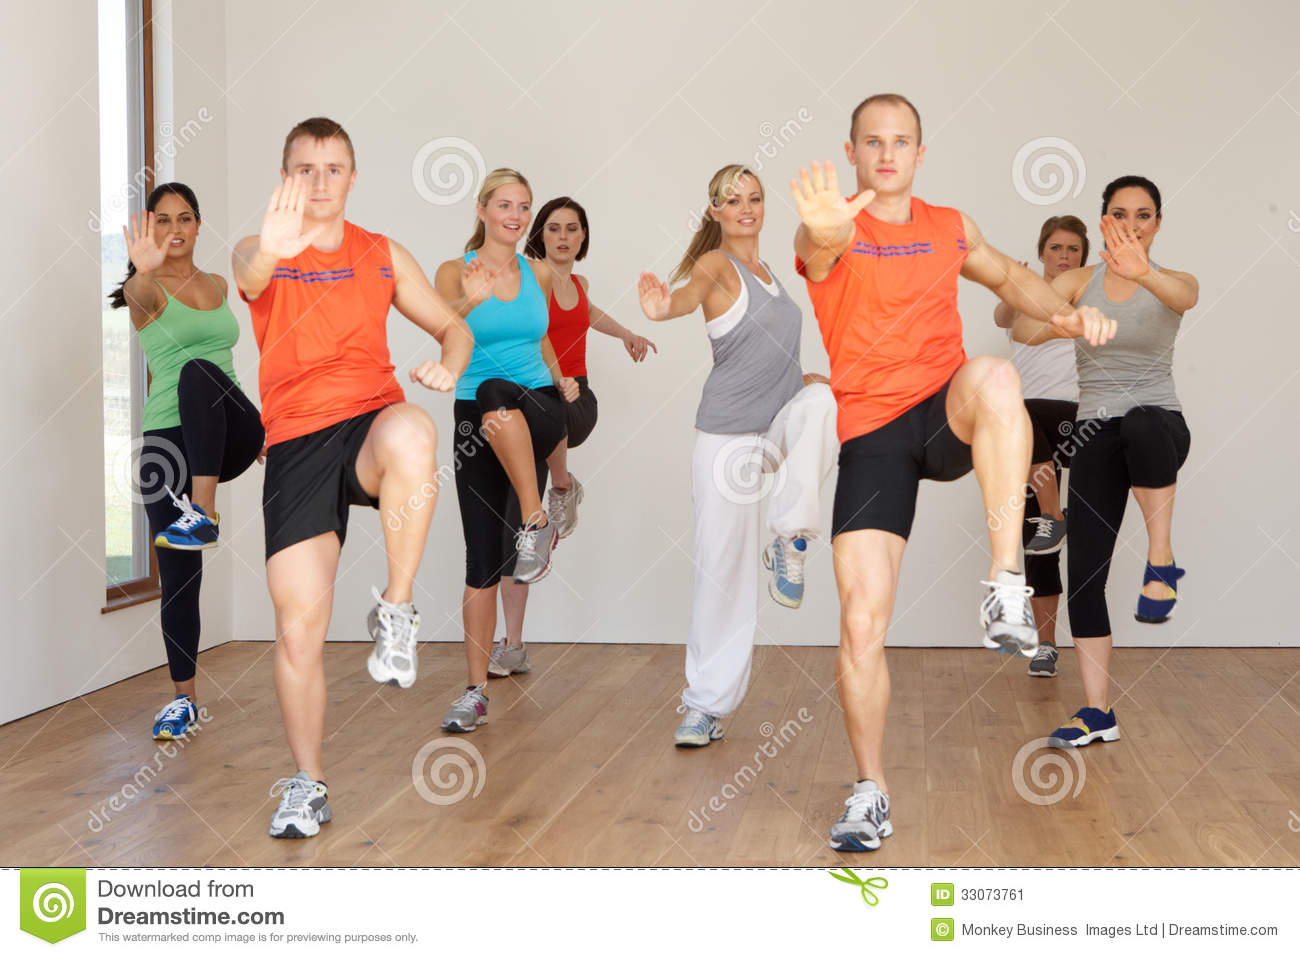 Group Of People Exercising In Dance Studio Stock Image   Image    